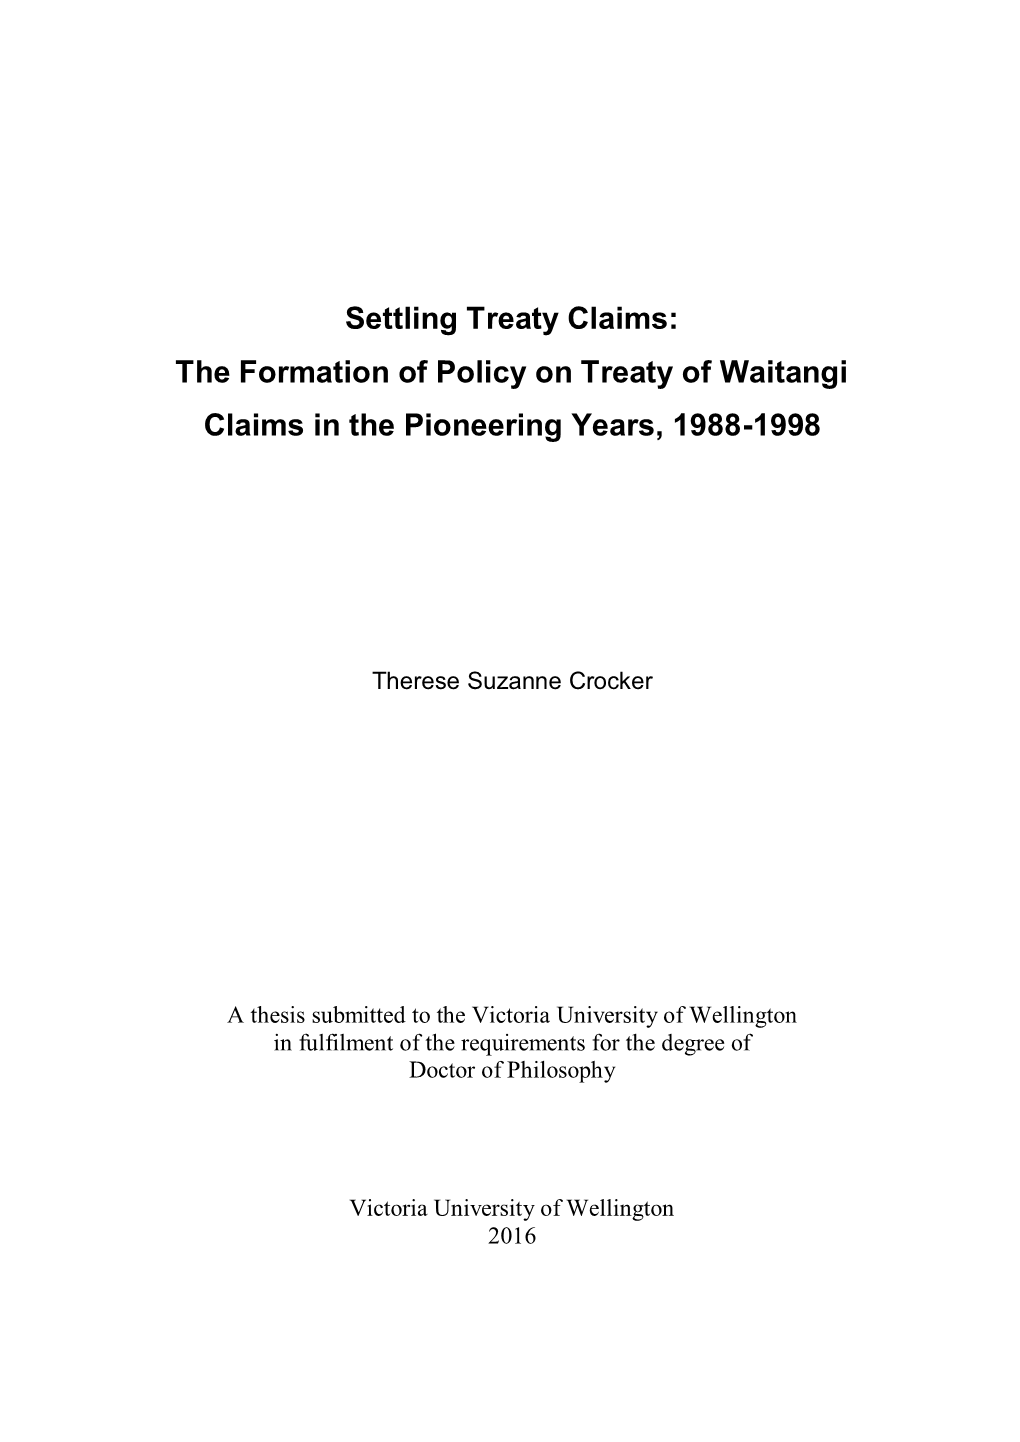 The Formation of Policy on Treaty of Waitangi Claims in the Pioneering Years, 1988-1998